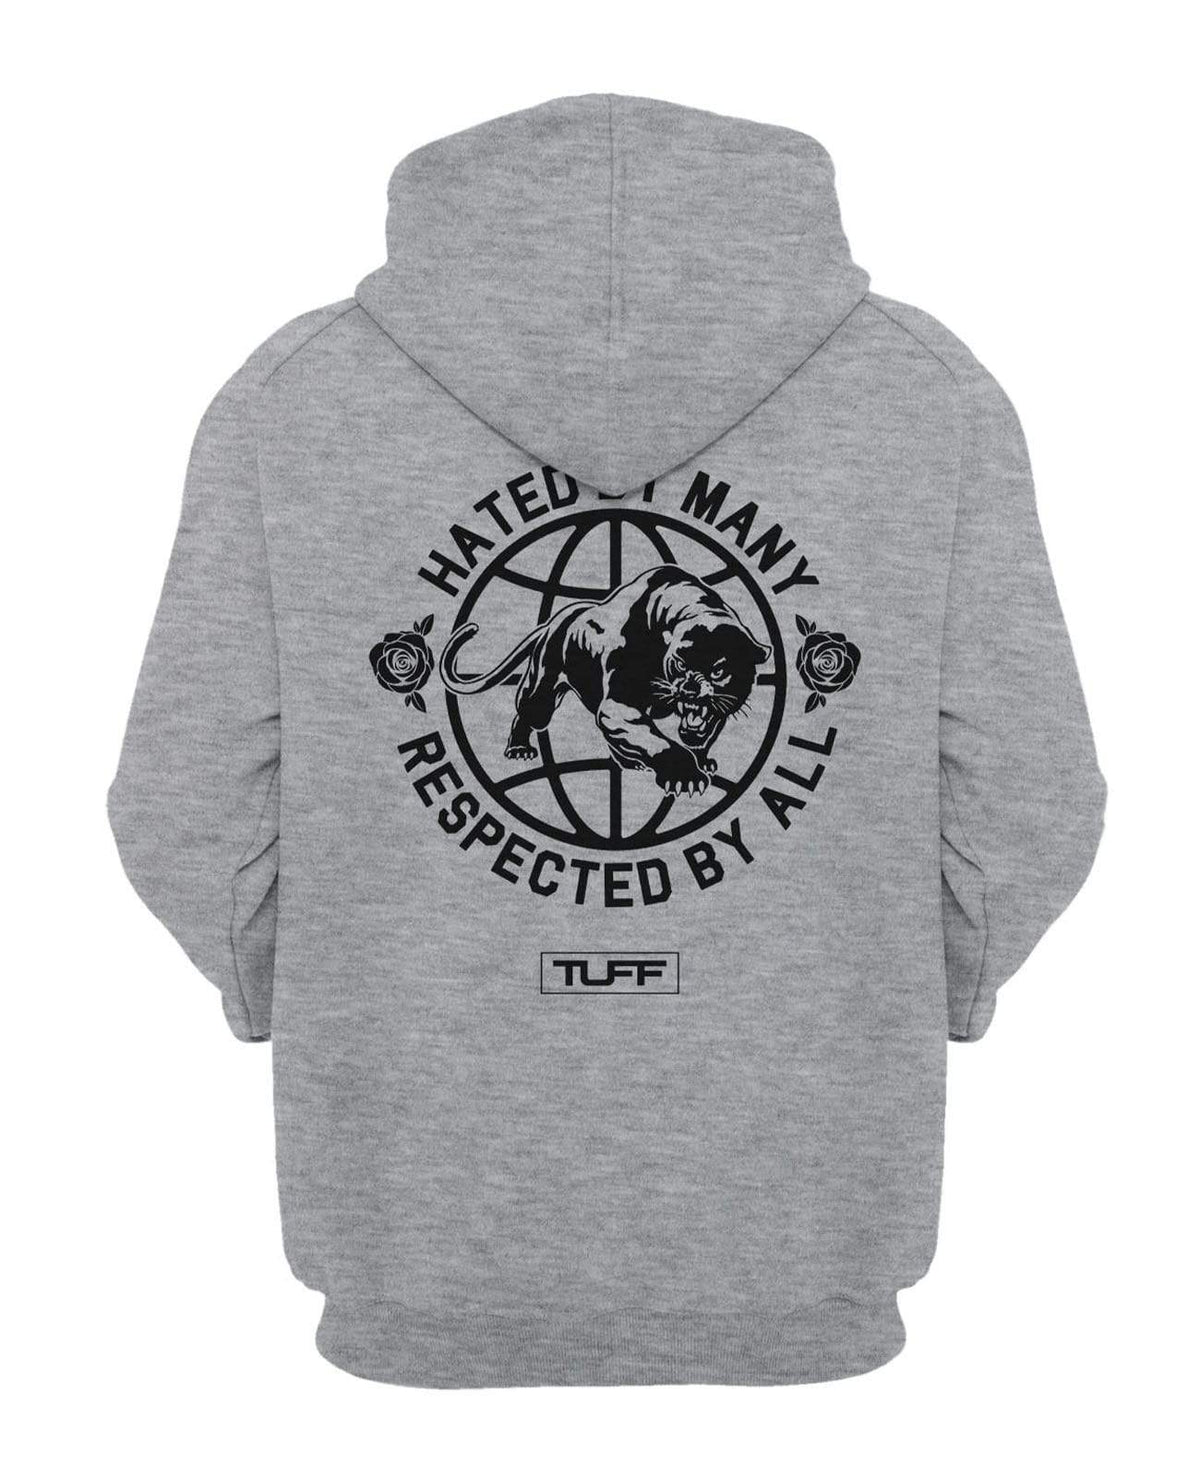 Hated By Many, Respected By All Hooded Sweatshirt XS / Gray TuffWraps.com